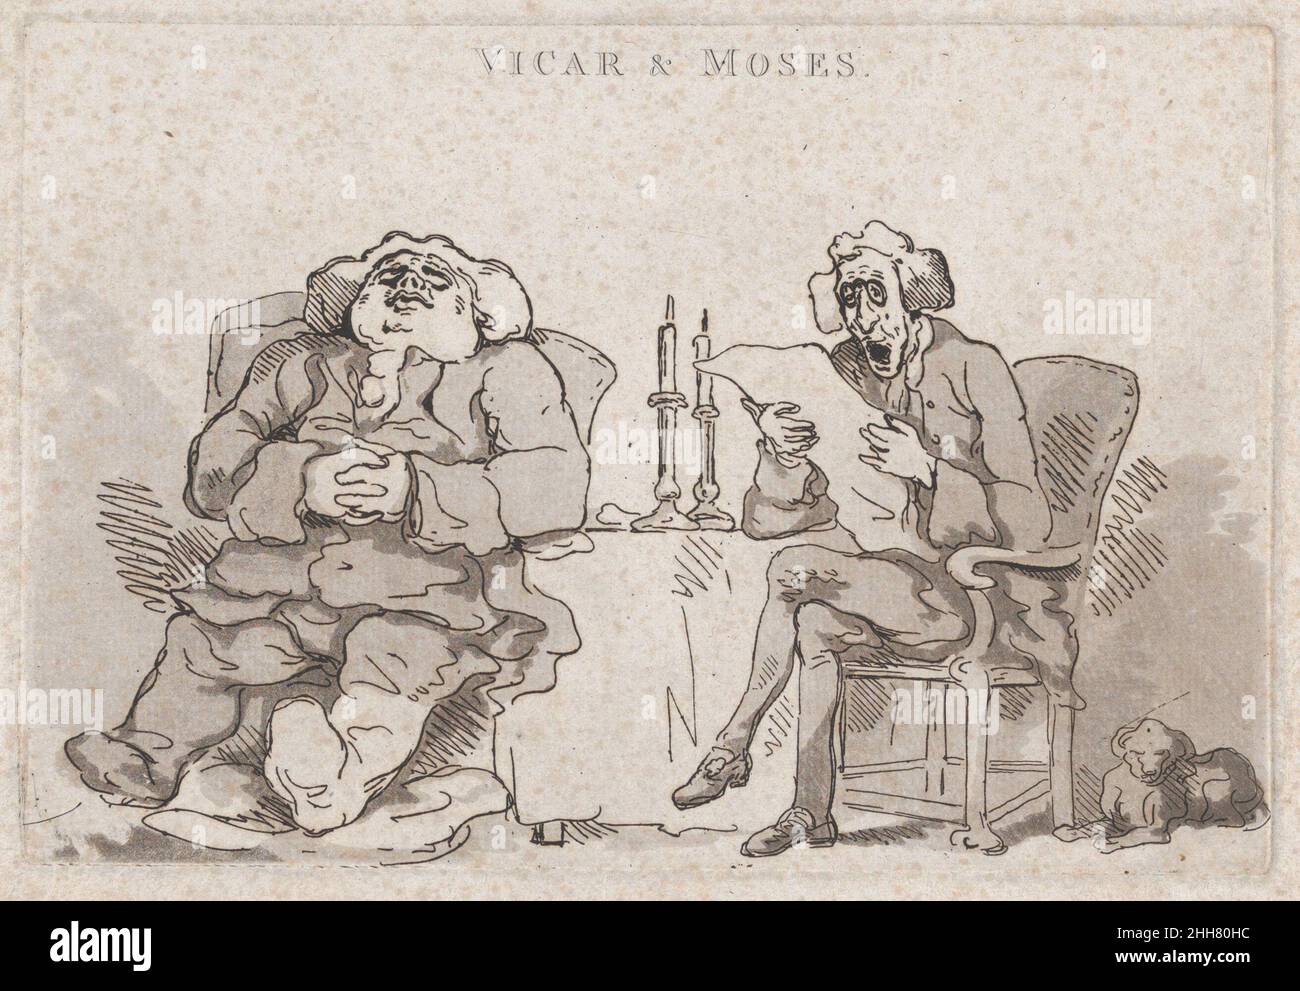 Vicar & Moses 1786 Thomas Rowlandson A stout man wearing a wig and clerical bands dozes in a chair, his gouty bandaged leg supported by a pillow. A thin companion at right reads at a table that supports two lit candles. A dog sleeps on the floor next to the reader's chair.. Vicar & Moses. Thomas Rowlandson (British, London 1757–1827 London). 1786. Etching and aquatint; before publication line. William Holland (British, 1757–1815). Prints Stock Photo